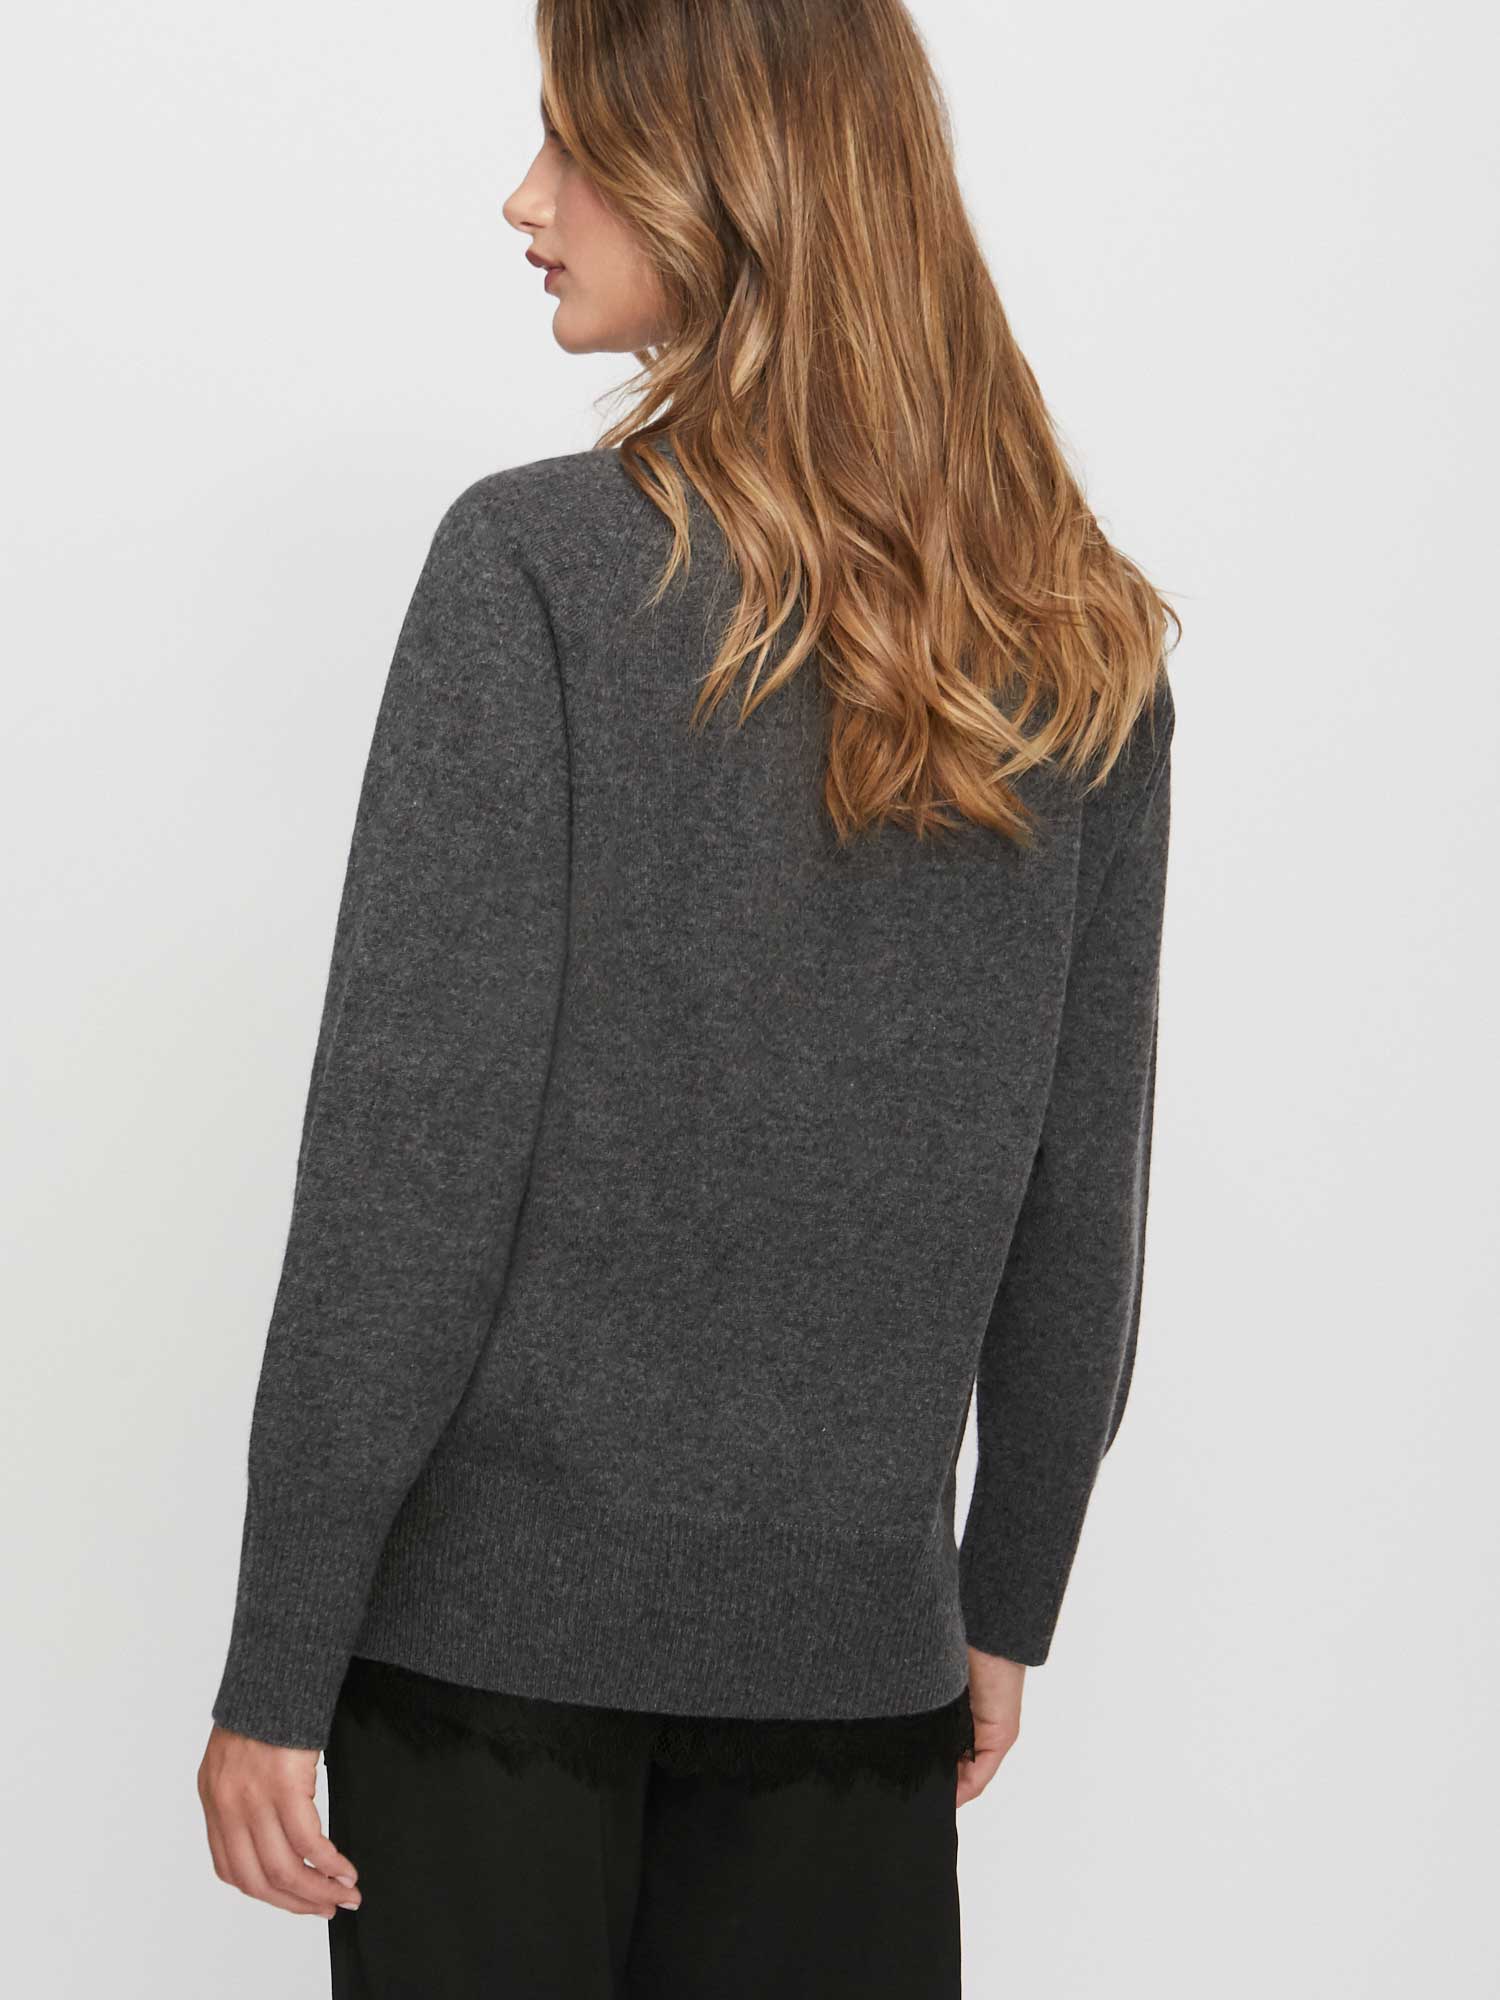 Dark grey lace layered v-neck sweater back view